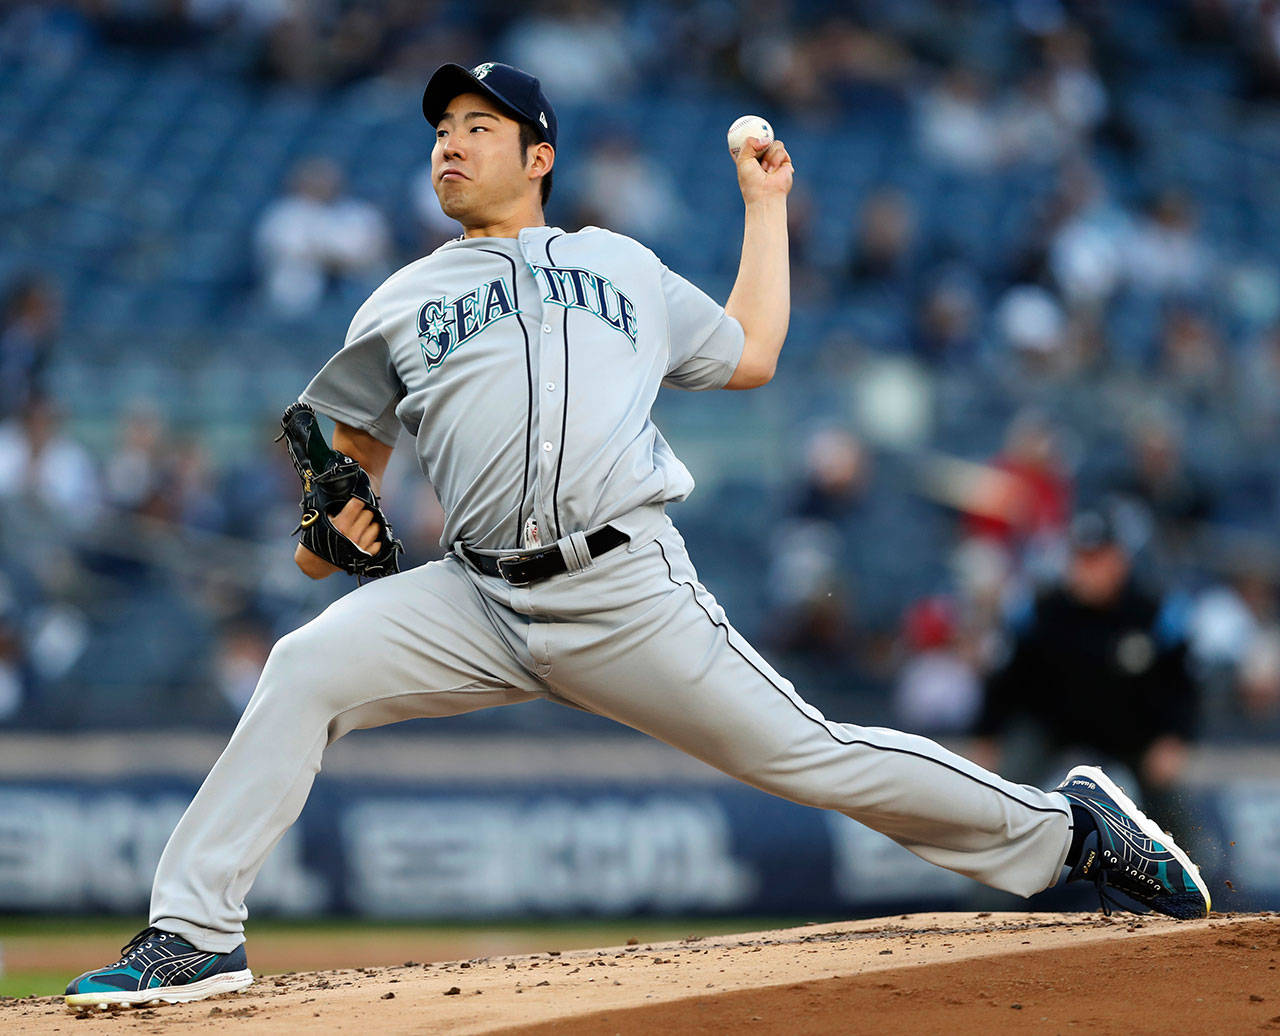 Mariners starting pitcher Yusei Kikuchi throws during the first inning of a game against the Yankees on May 8, 2019, in New York. (AP Photo/Kathy Willens)